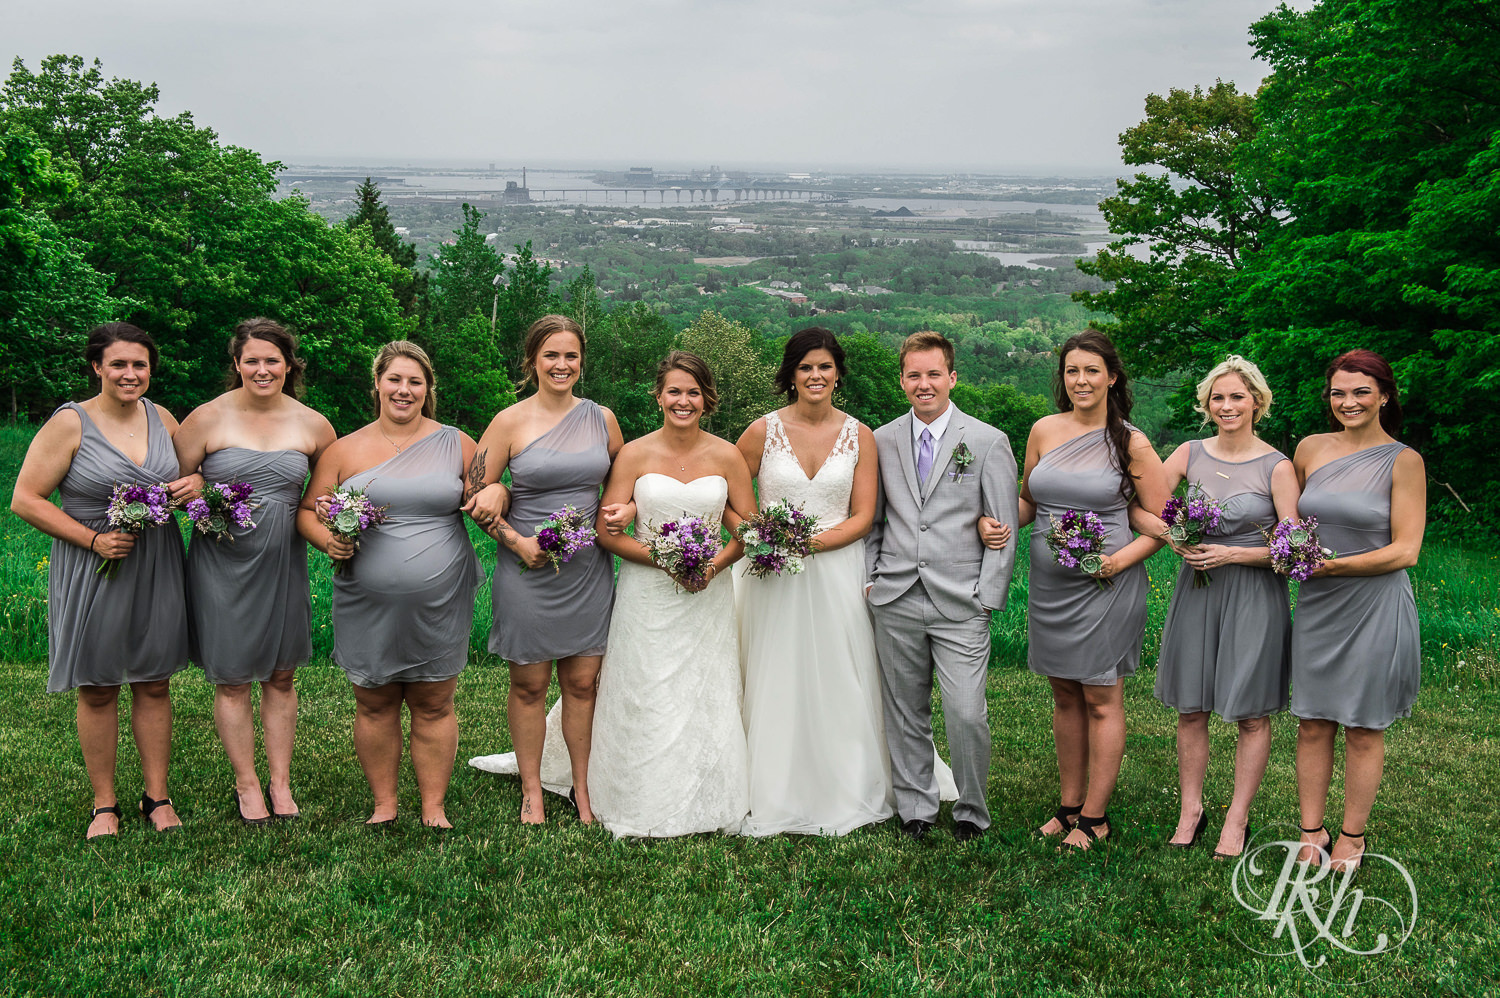 Lesbian brides smile with wedding party outside at Spirit Mountain in Duluth, Minnesota.